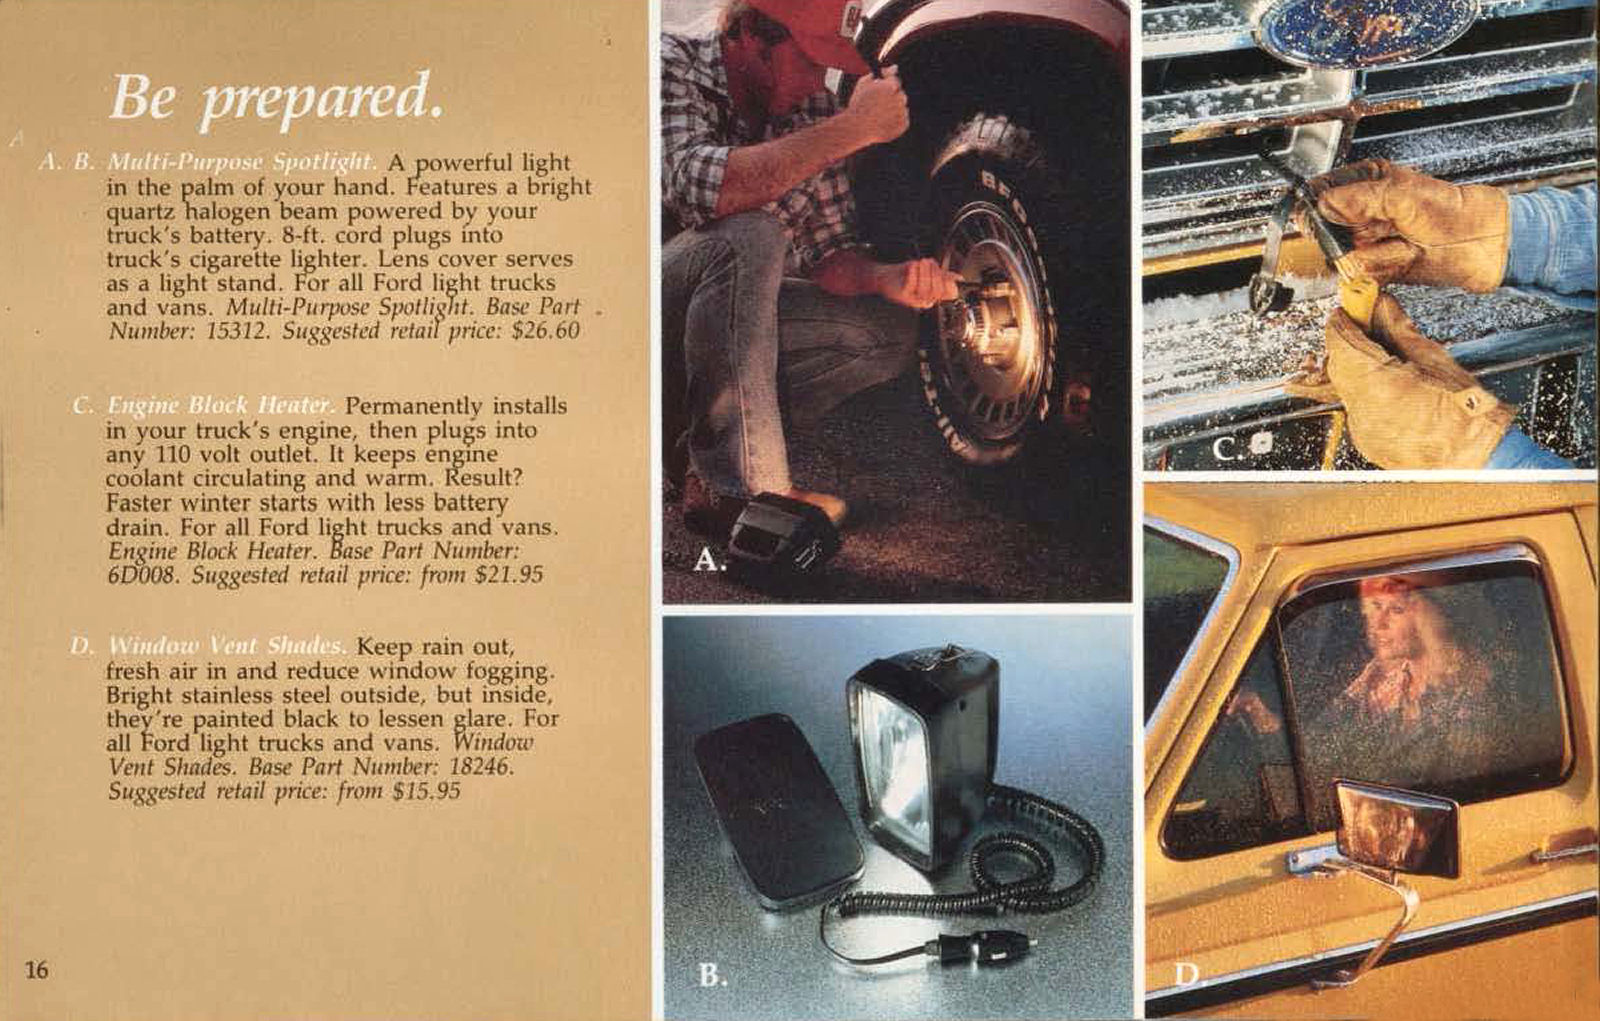 1985 Ford Light Truck Accessories.pdf-2024-5-28 12.0.32_Page_17